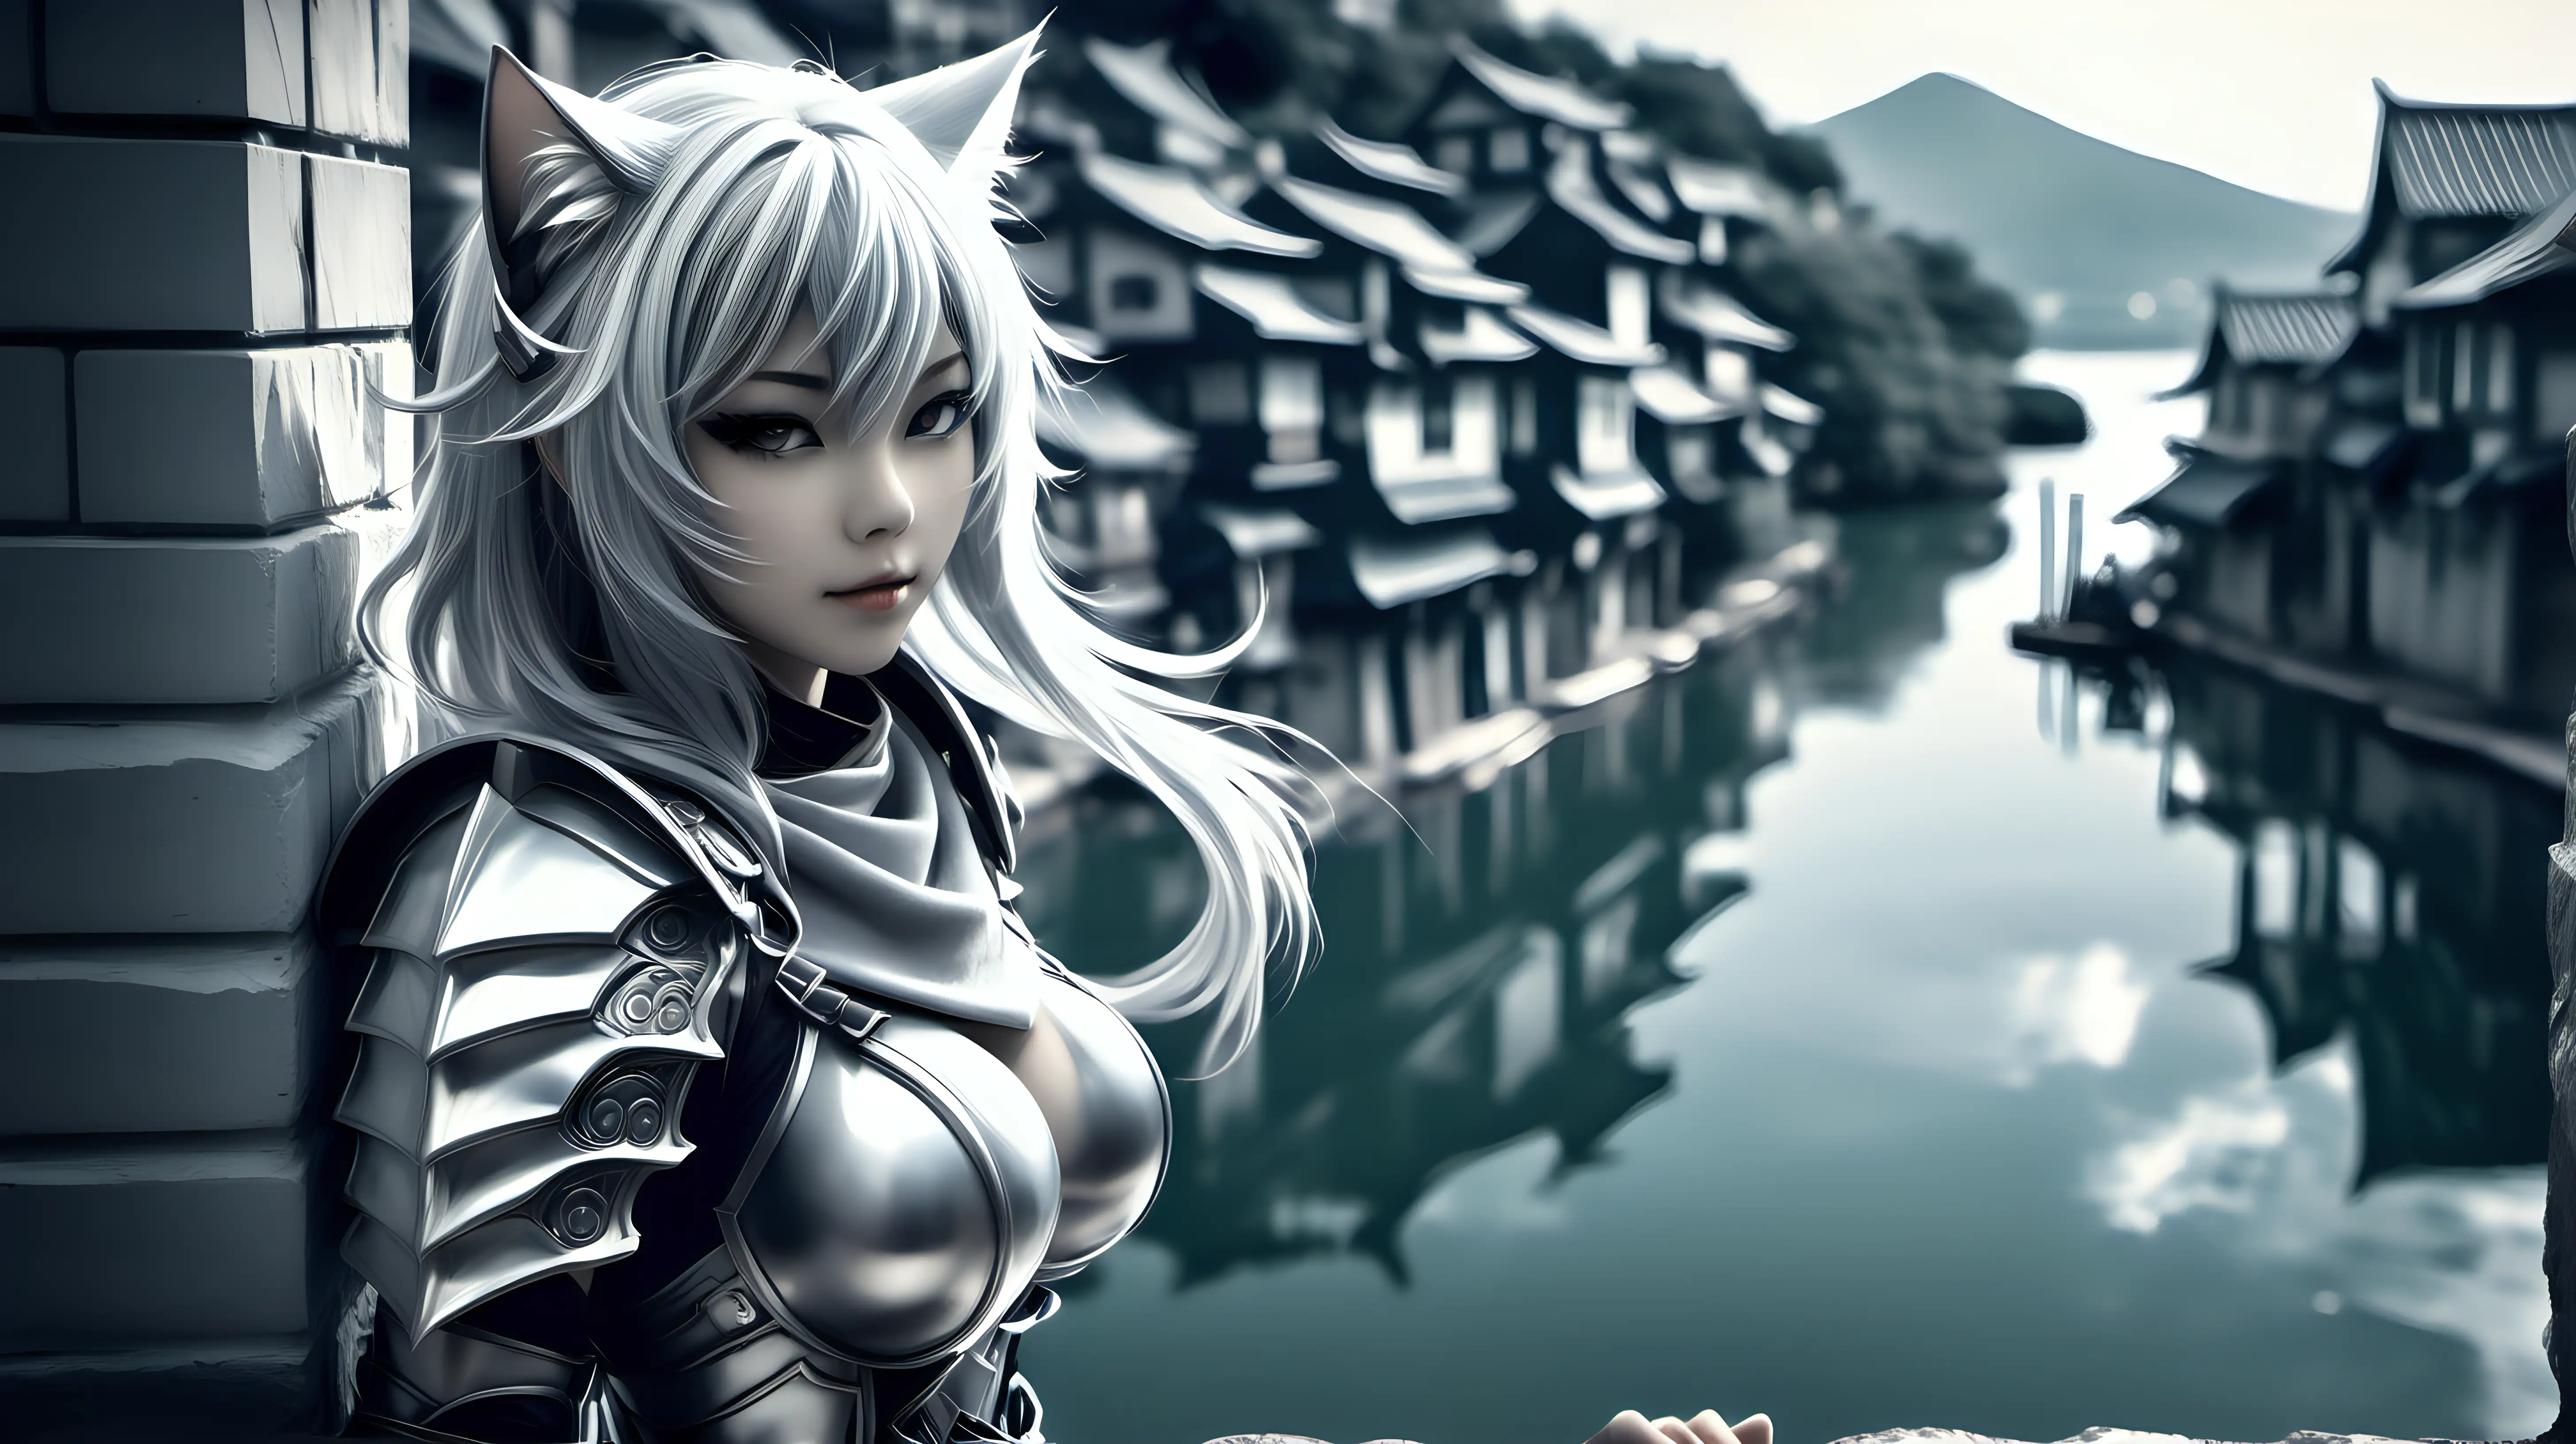 Silver Haired Nekomimi Warrior Leaning on Wall in Fantasy City by the Lake